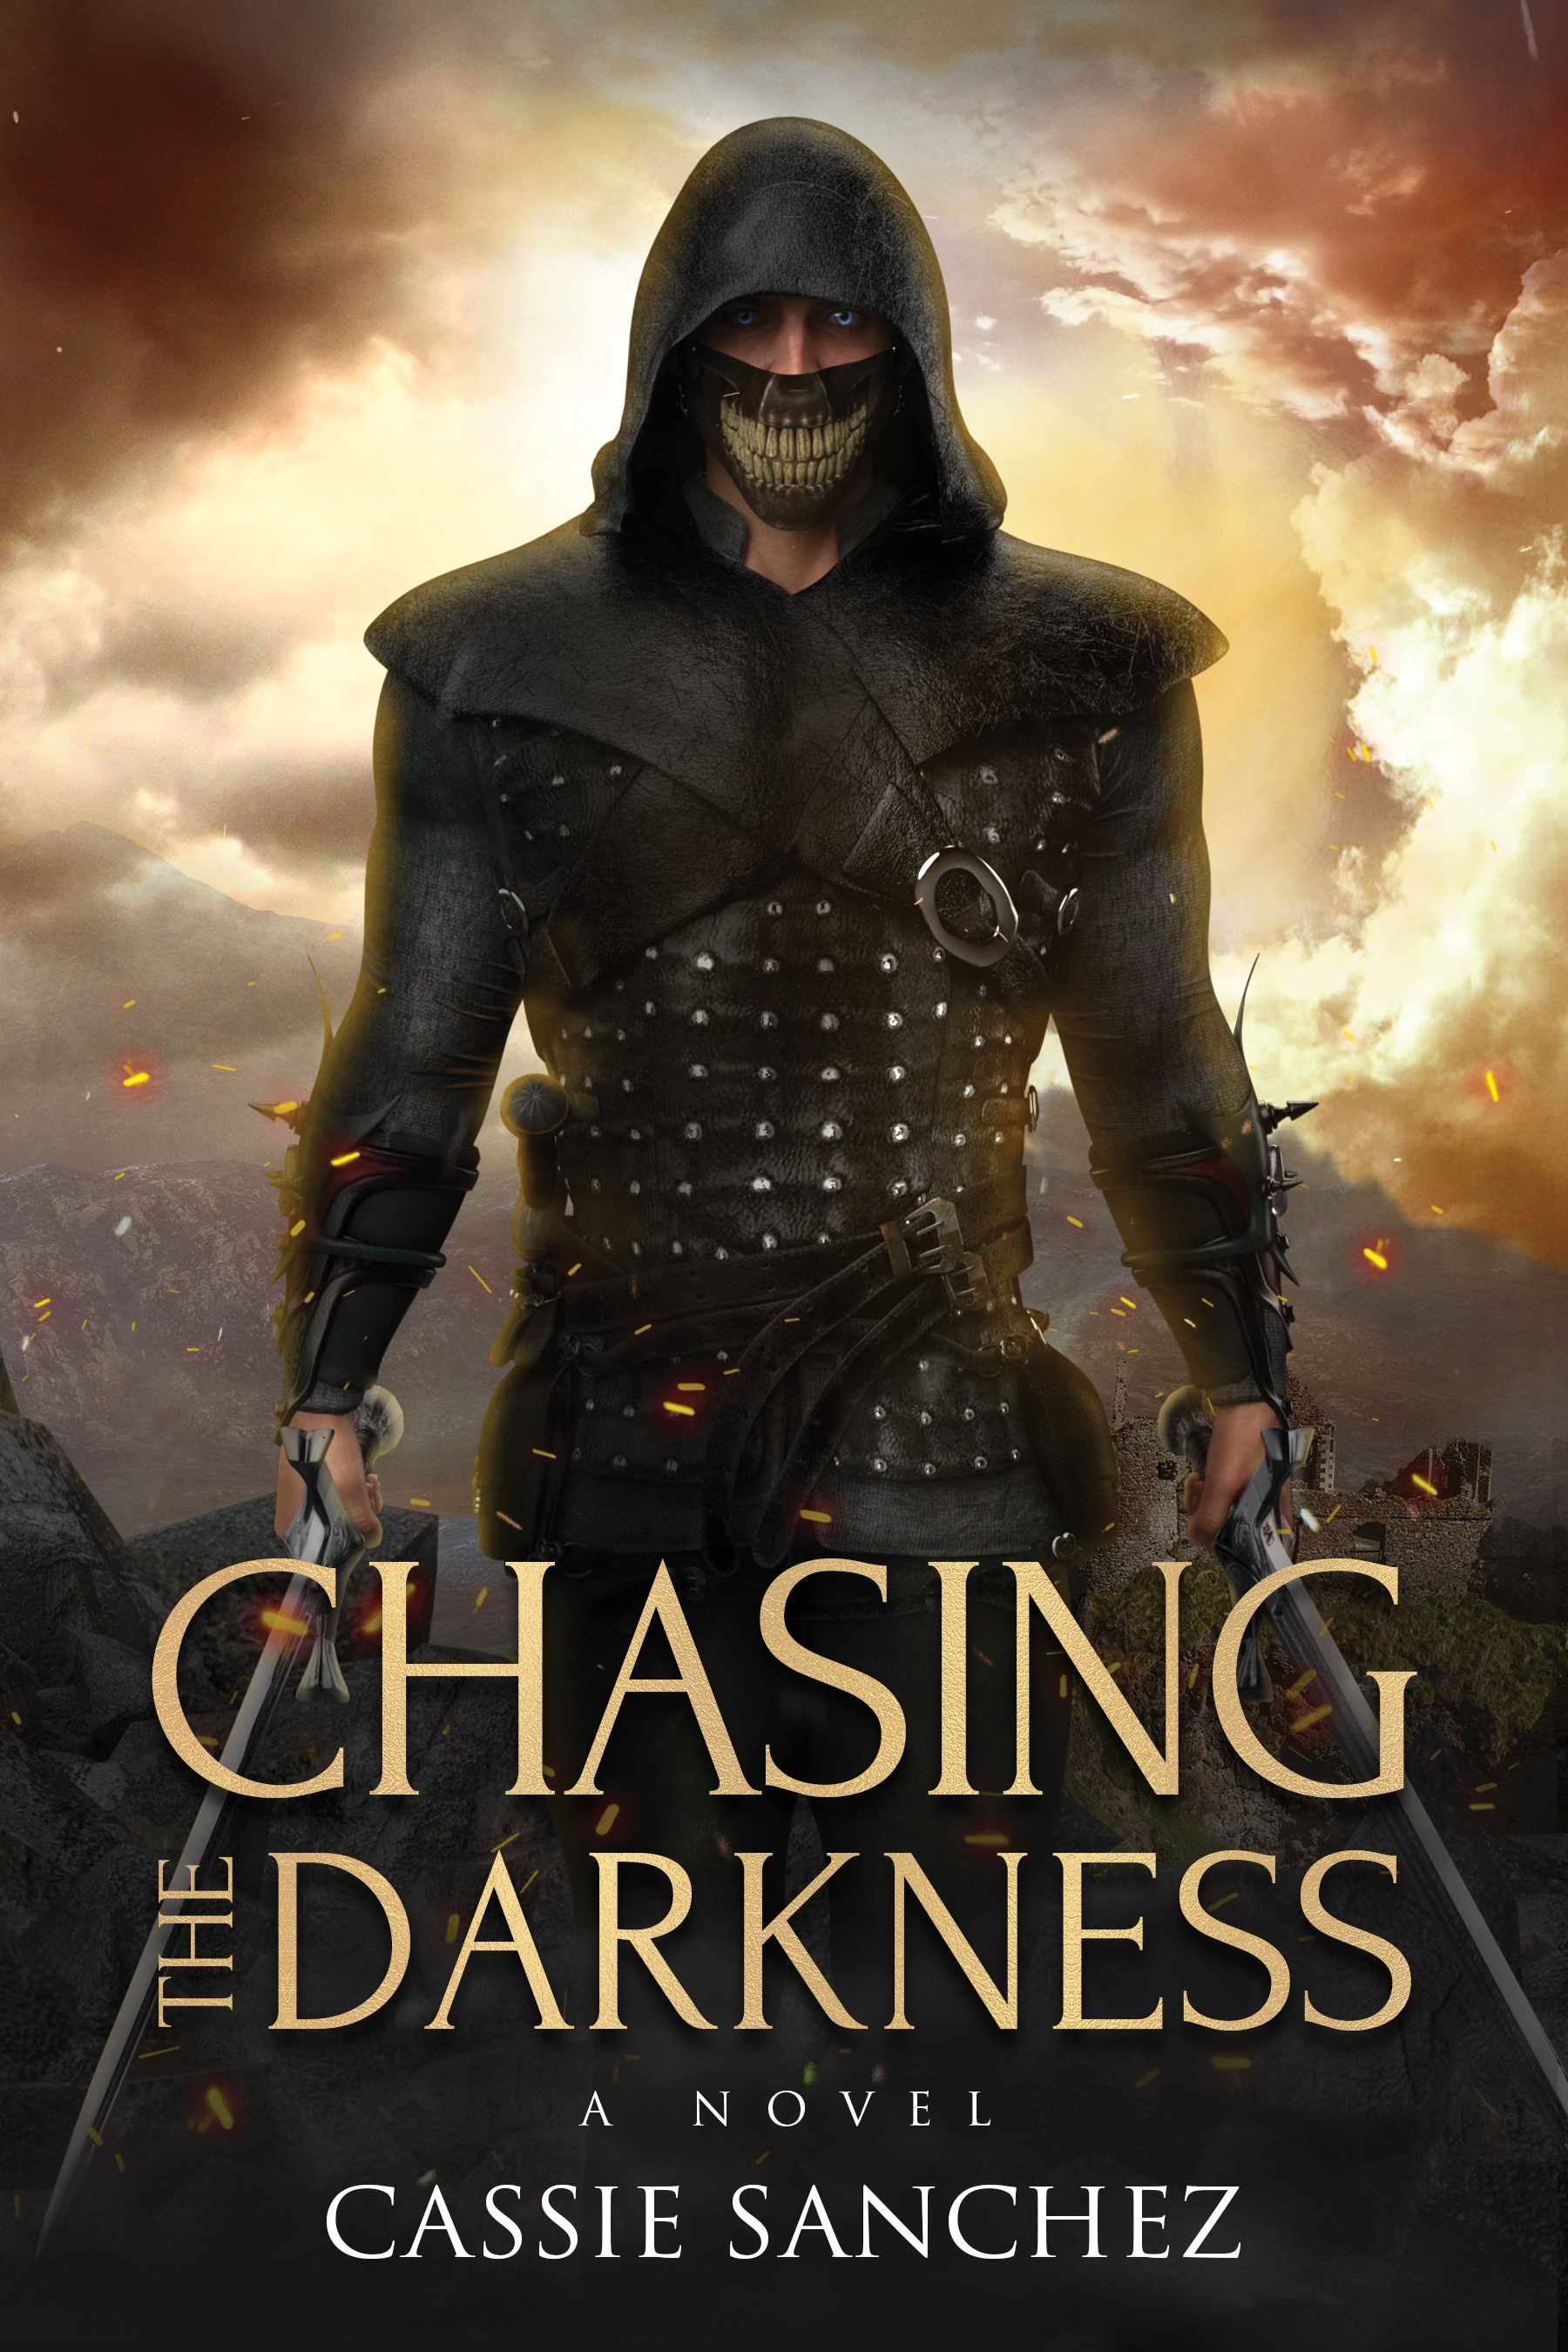 Debut Author, Cassie Sanchez, Wins Another Award for Her Fantasy, "Chasing the Darkness."